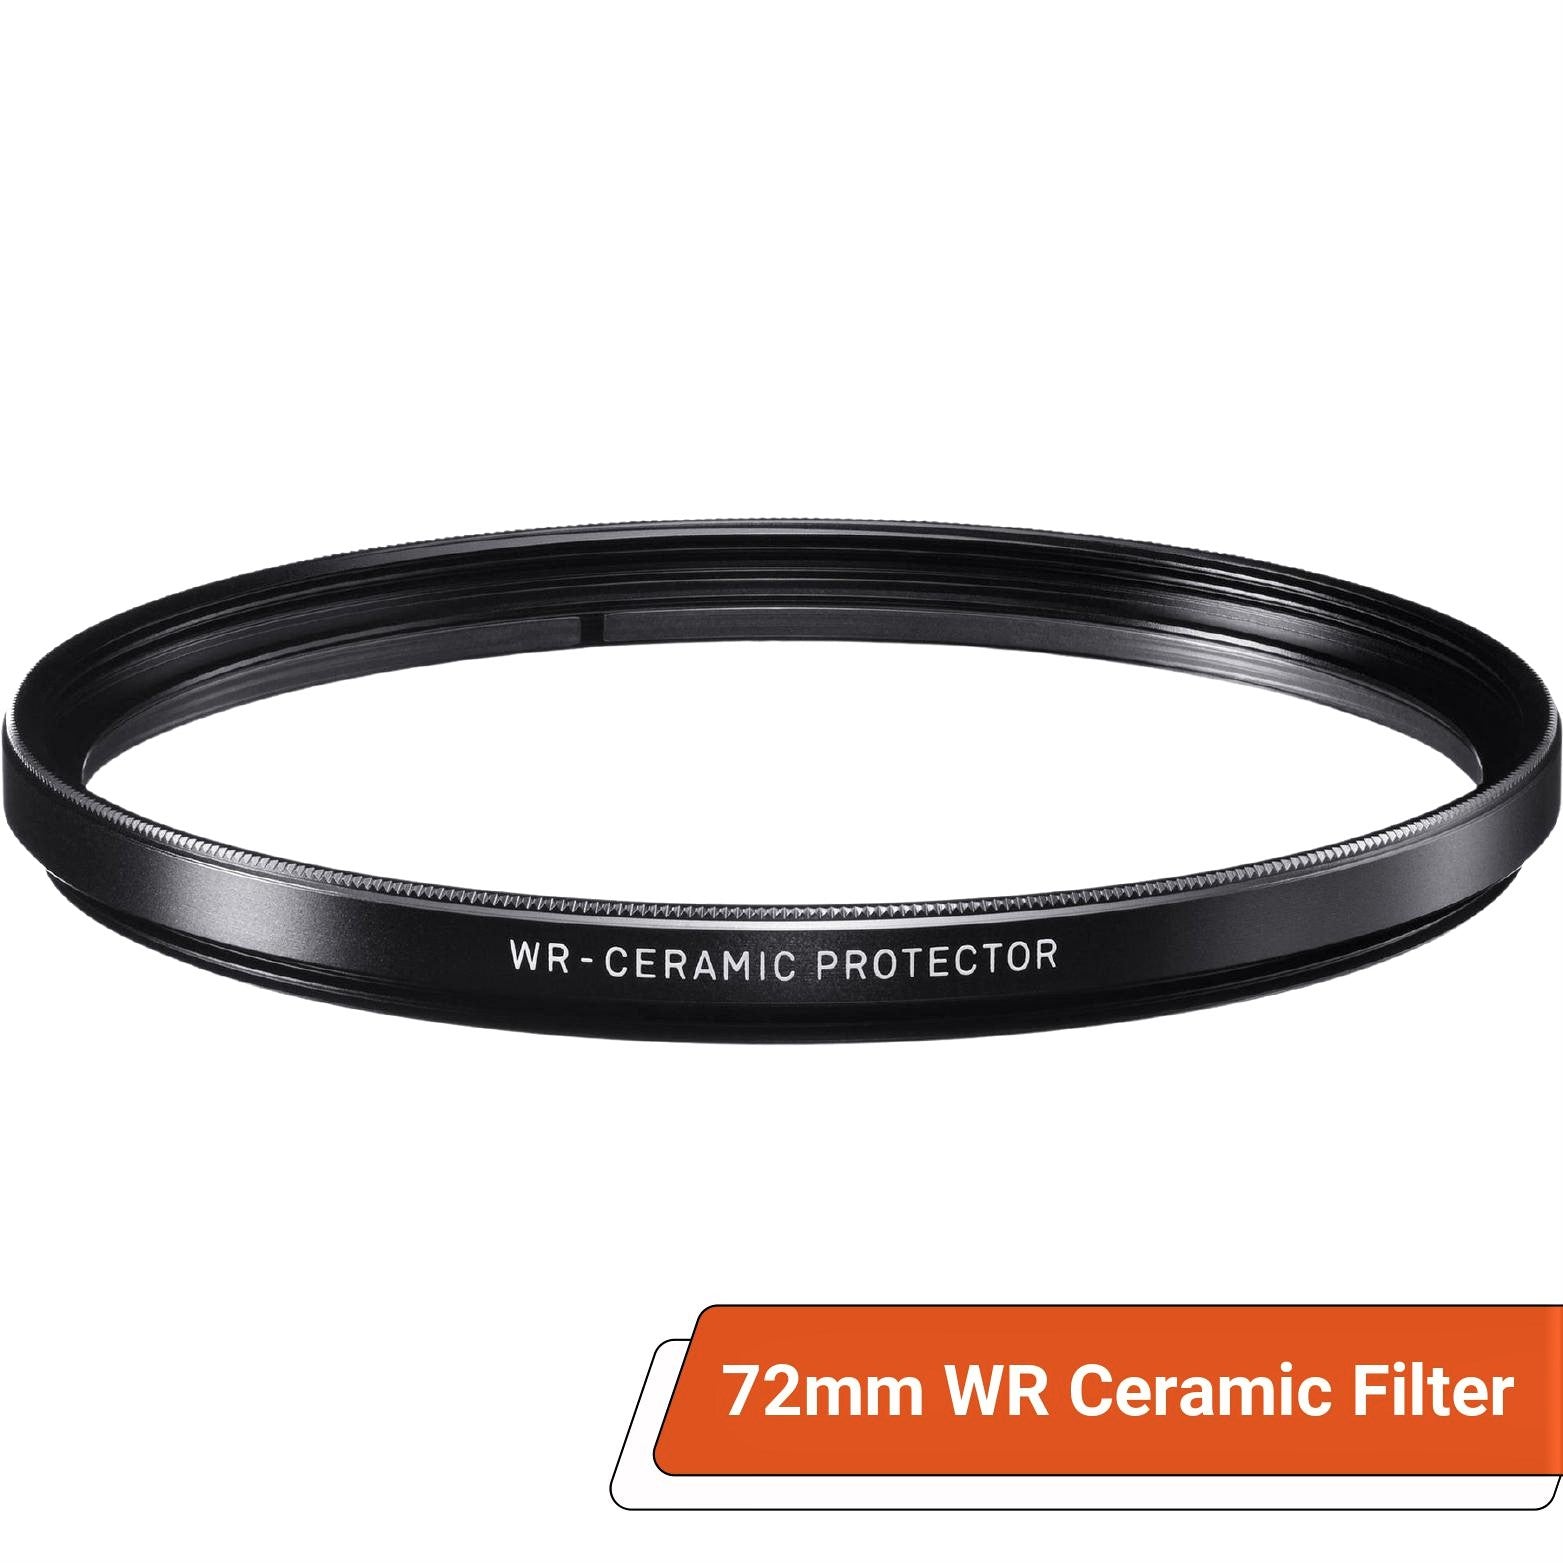 Sigma 72mm WR (Water Repellent) Ceramic Protector Filter